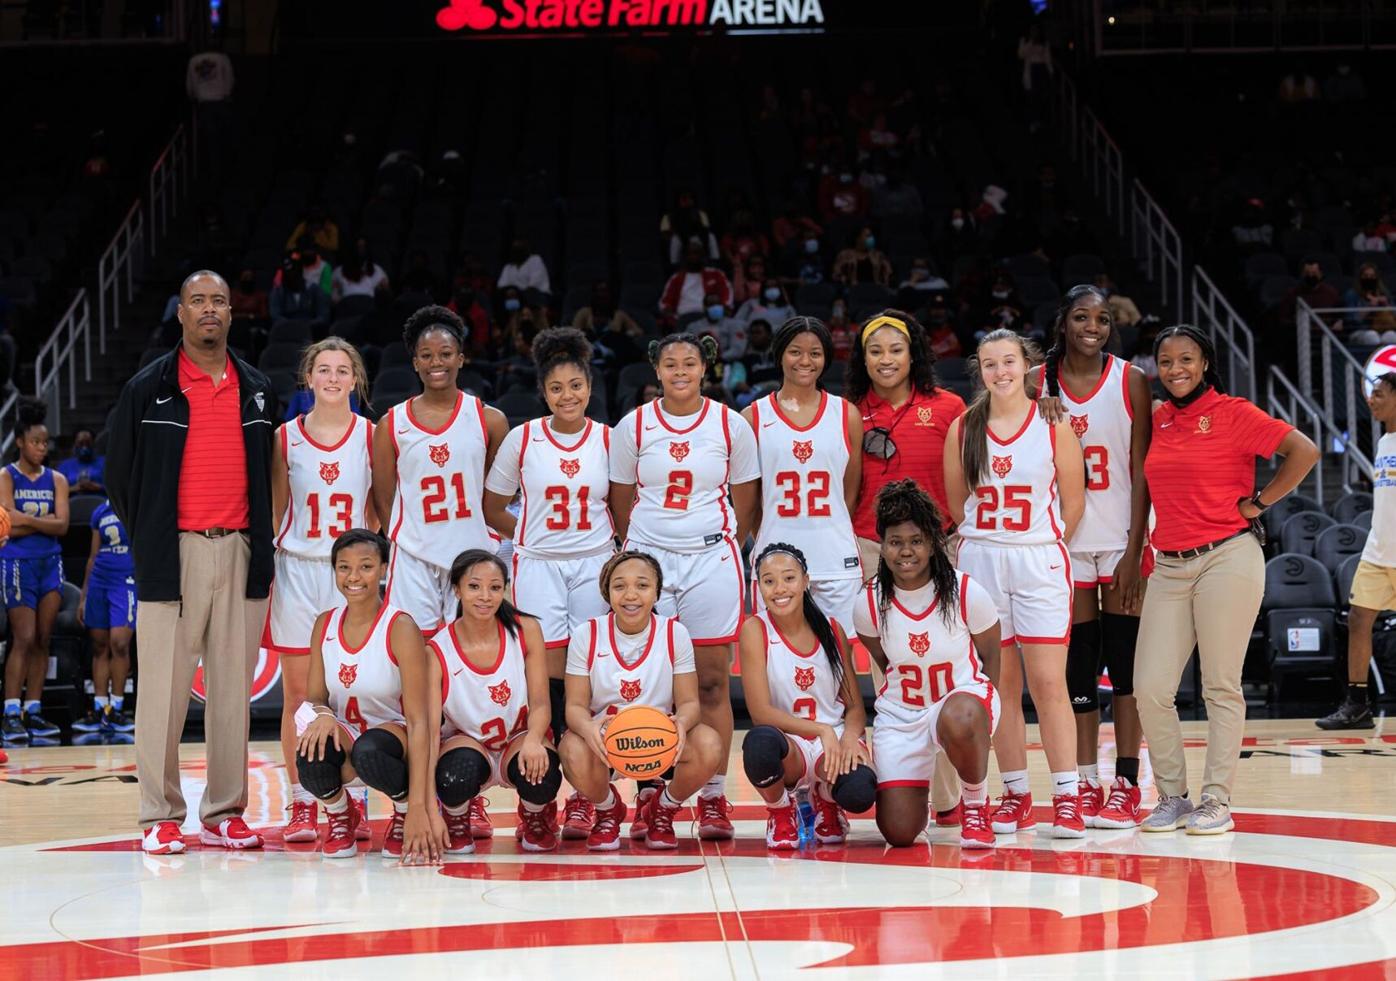 Rome girls at State Farm Arena